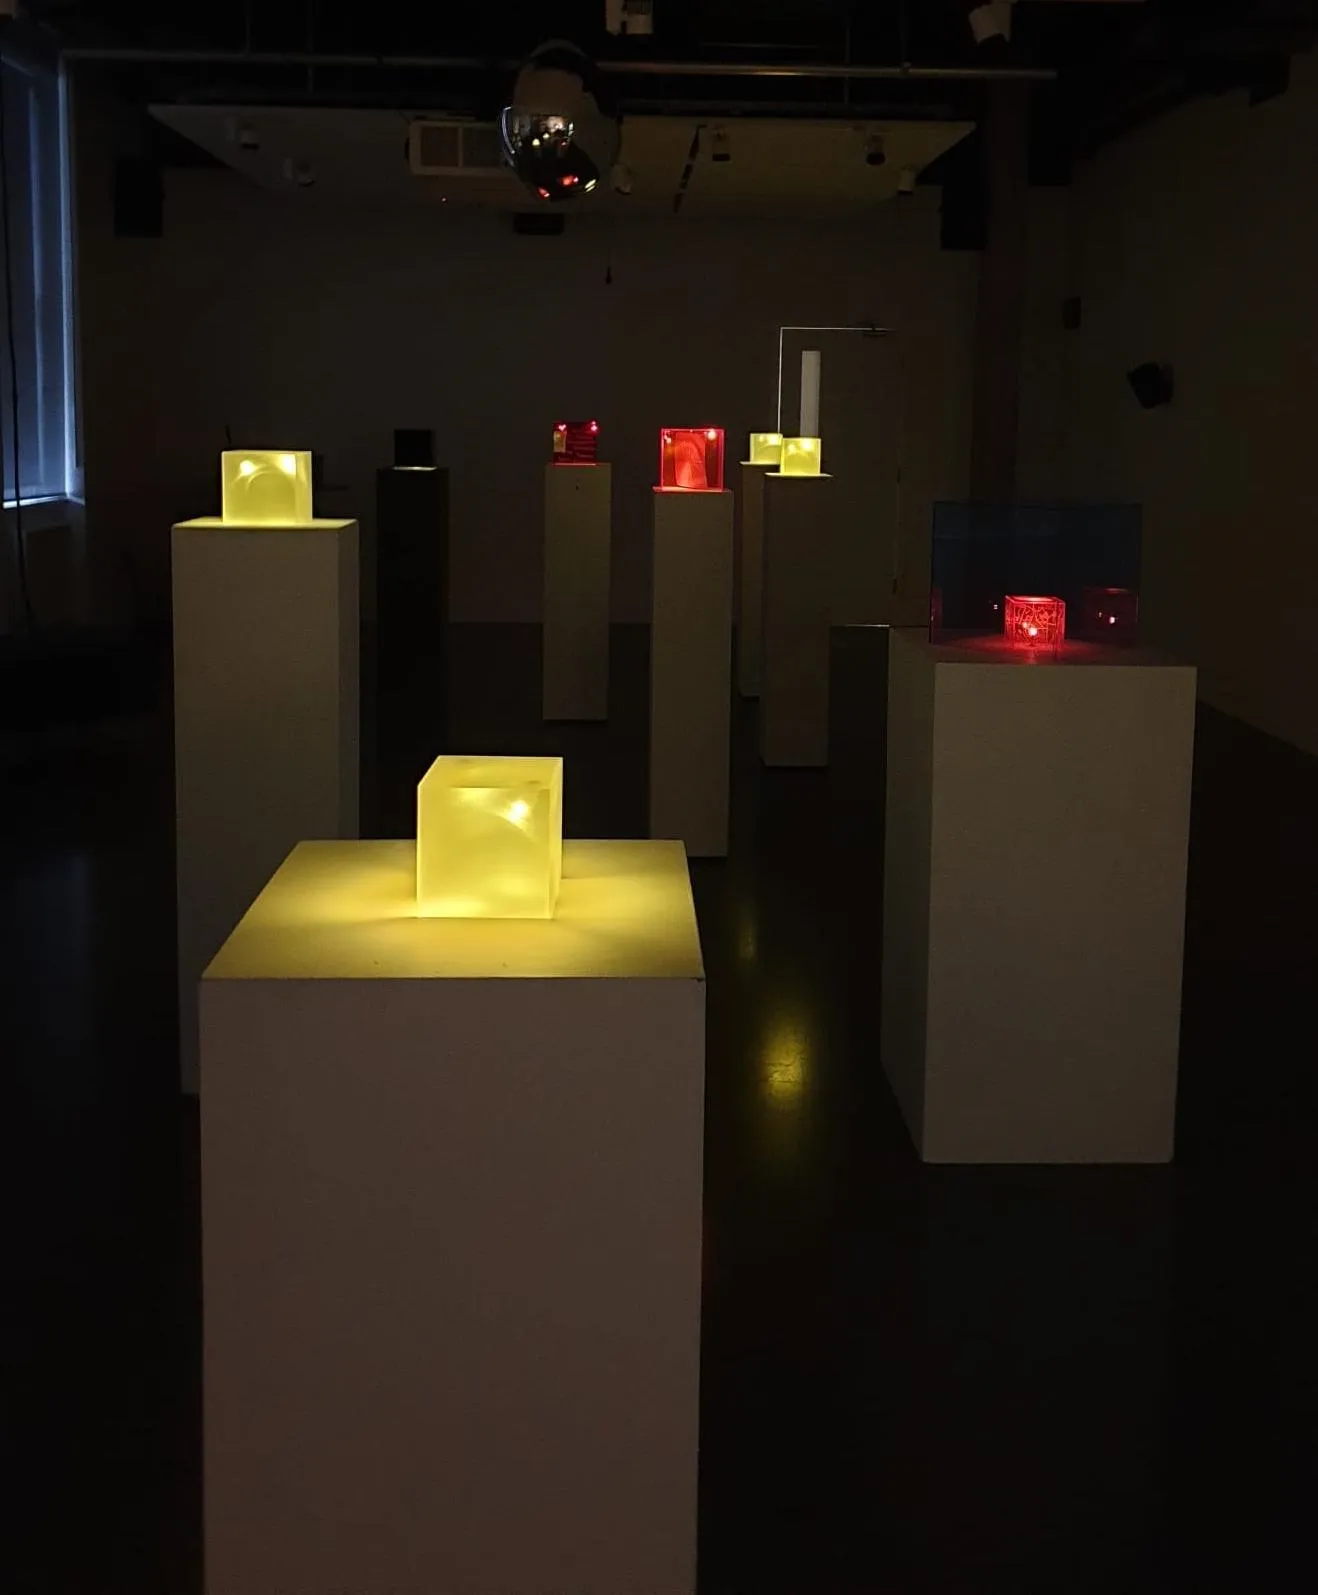 square boxes lit up on plinths in a dark room